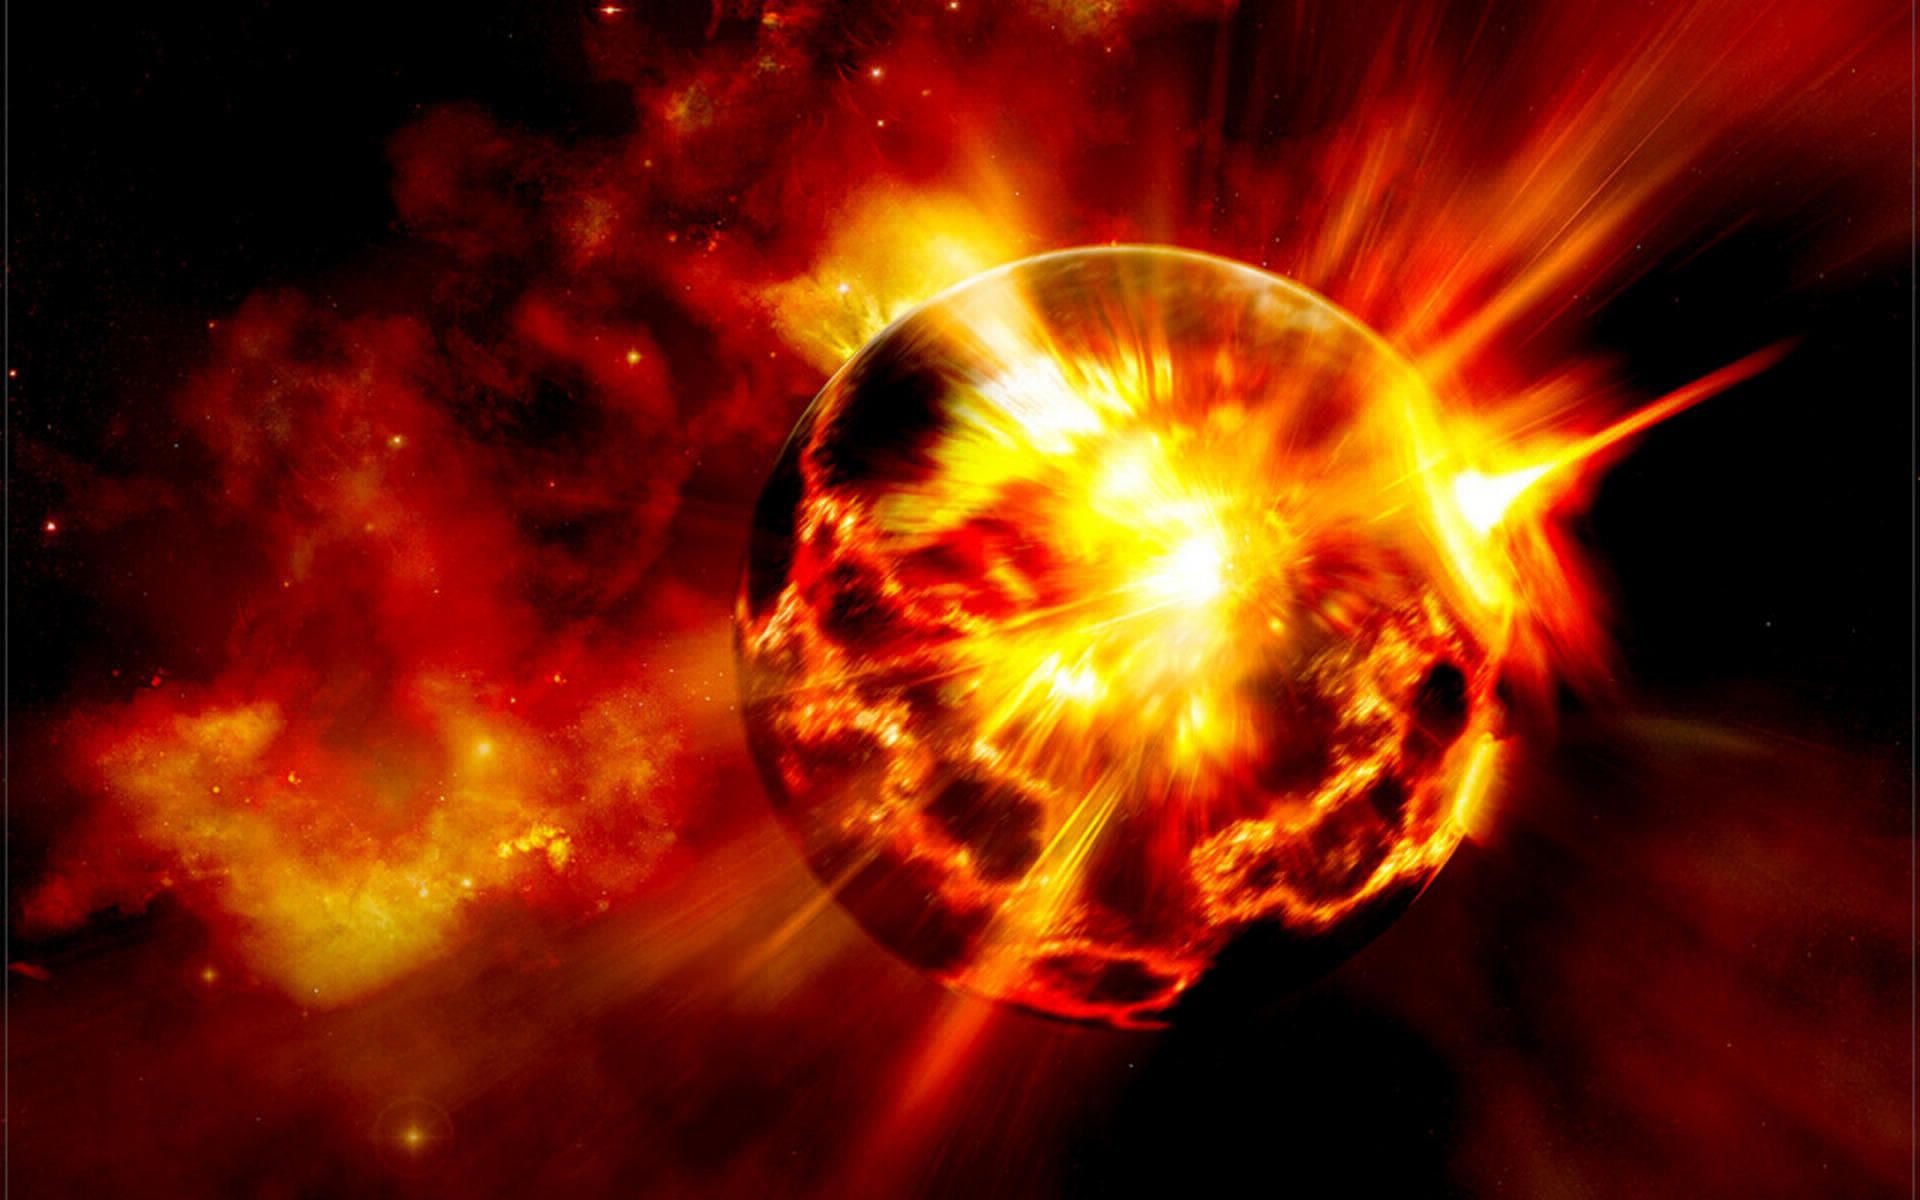 Exploding Planet Wallpaper Picture Photo Image 1846 - Star Explosion Wallpaper